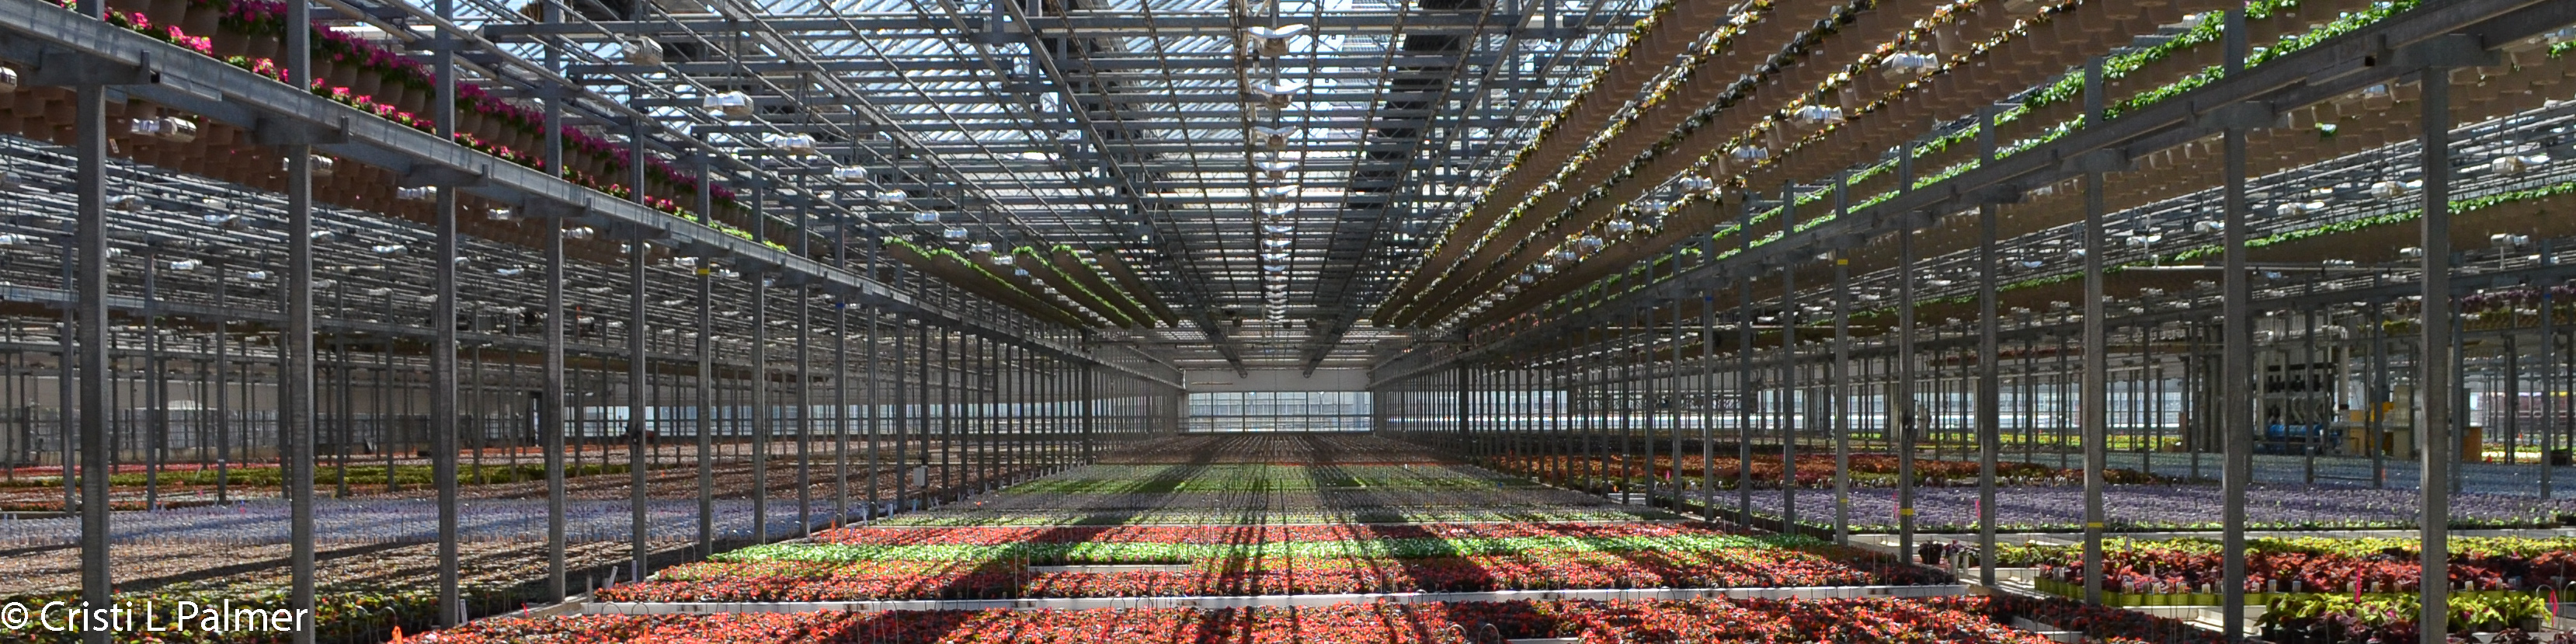 Indoor production of young bedding plants and hanging baskets in large greenhouse operation